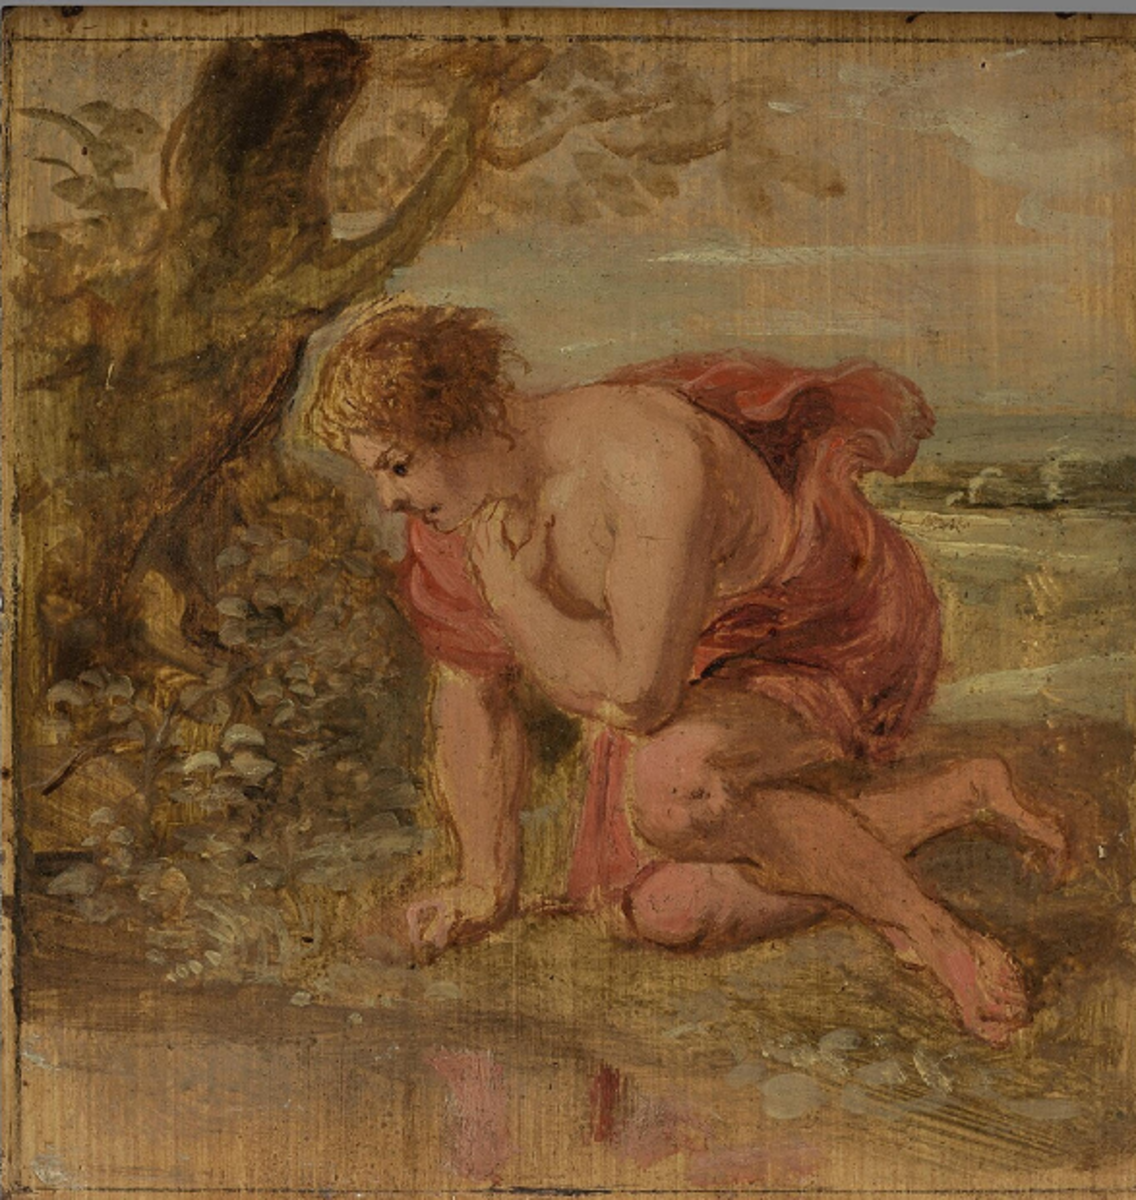 Narcissus is fascinated by his own reflection in the surface of the water. Oil painting by Peter Paul Rubens, 17th century.